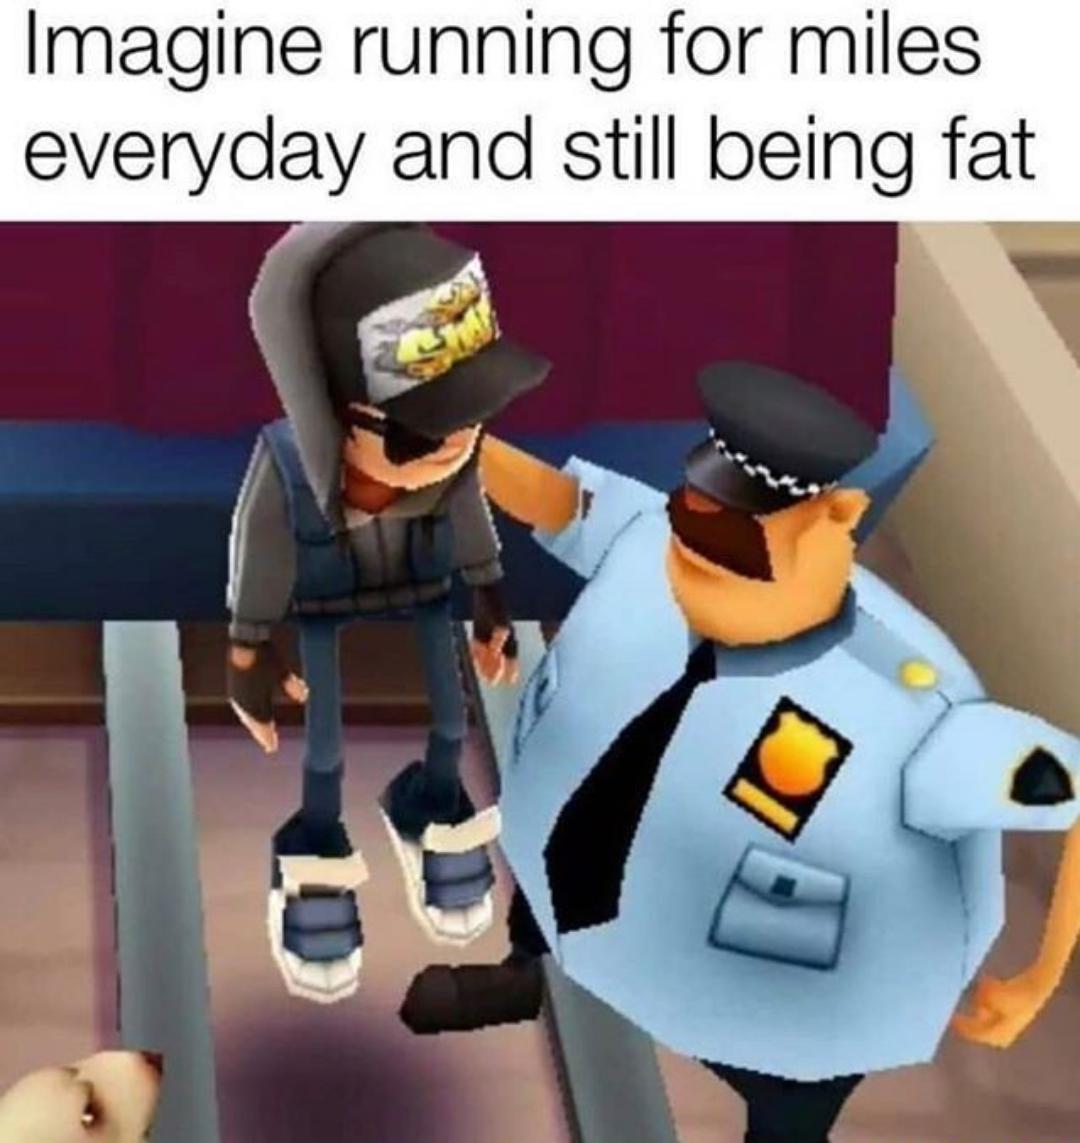 Funny memes - subway surfer cop - Imagine running for miles everyday and still being fat